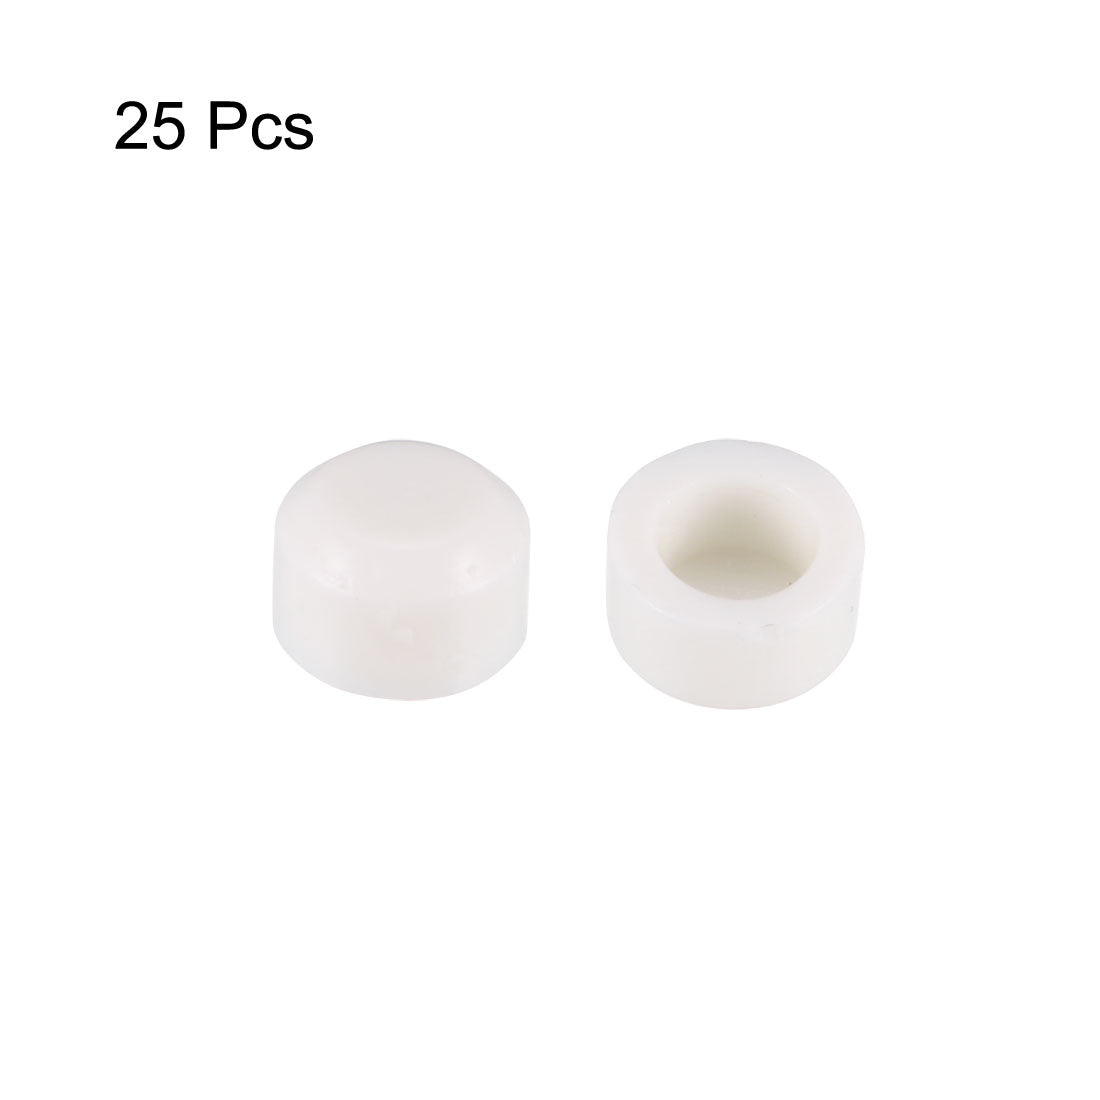 uxcell Uxcell 25pcs 3.1mm Hole Dia Plastic Pushbutton Tactile Switch Caps Cover Keycaps Protector White for 6x6 Tact Switch